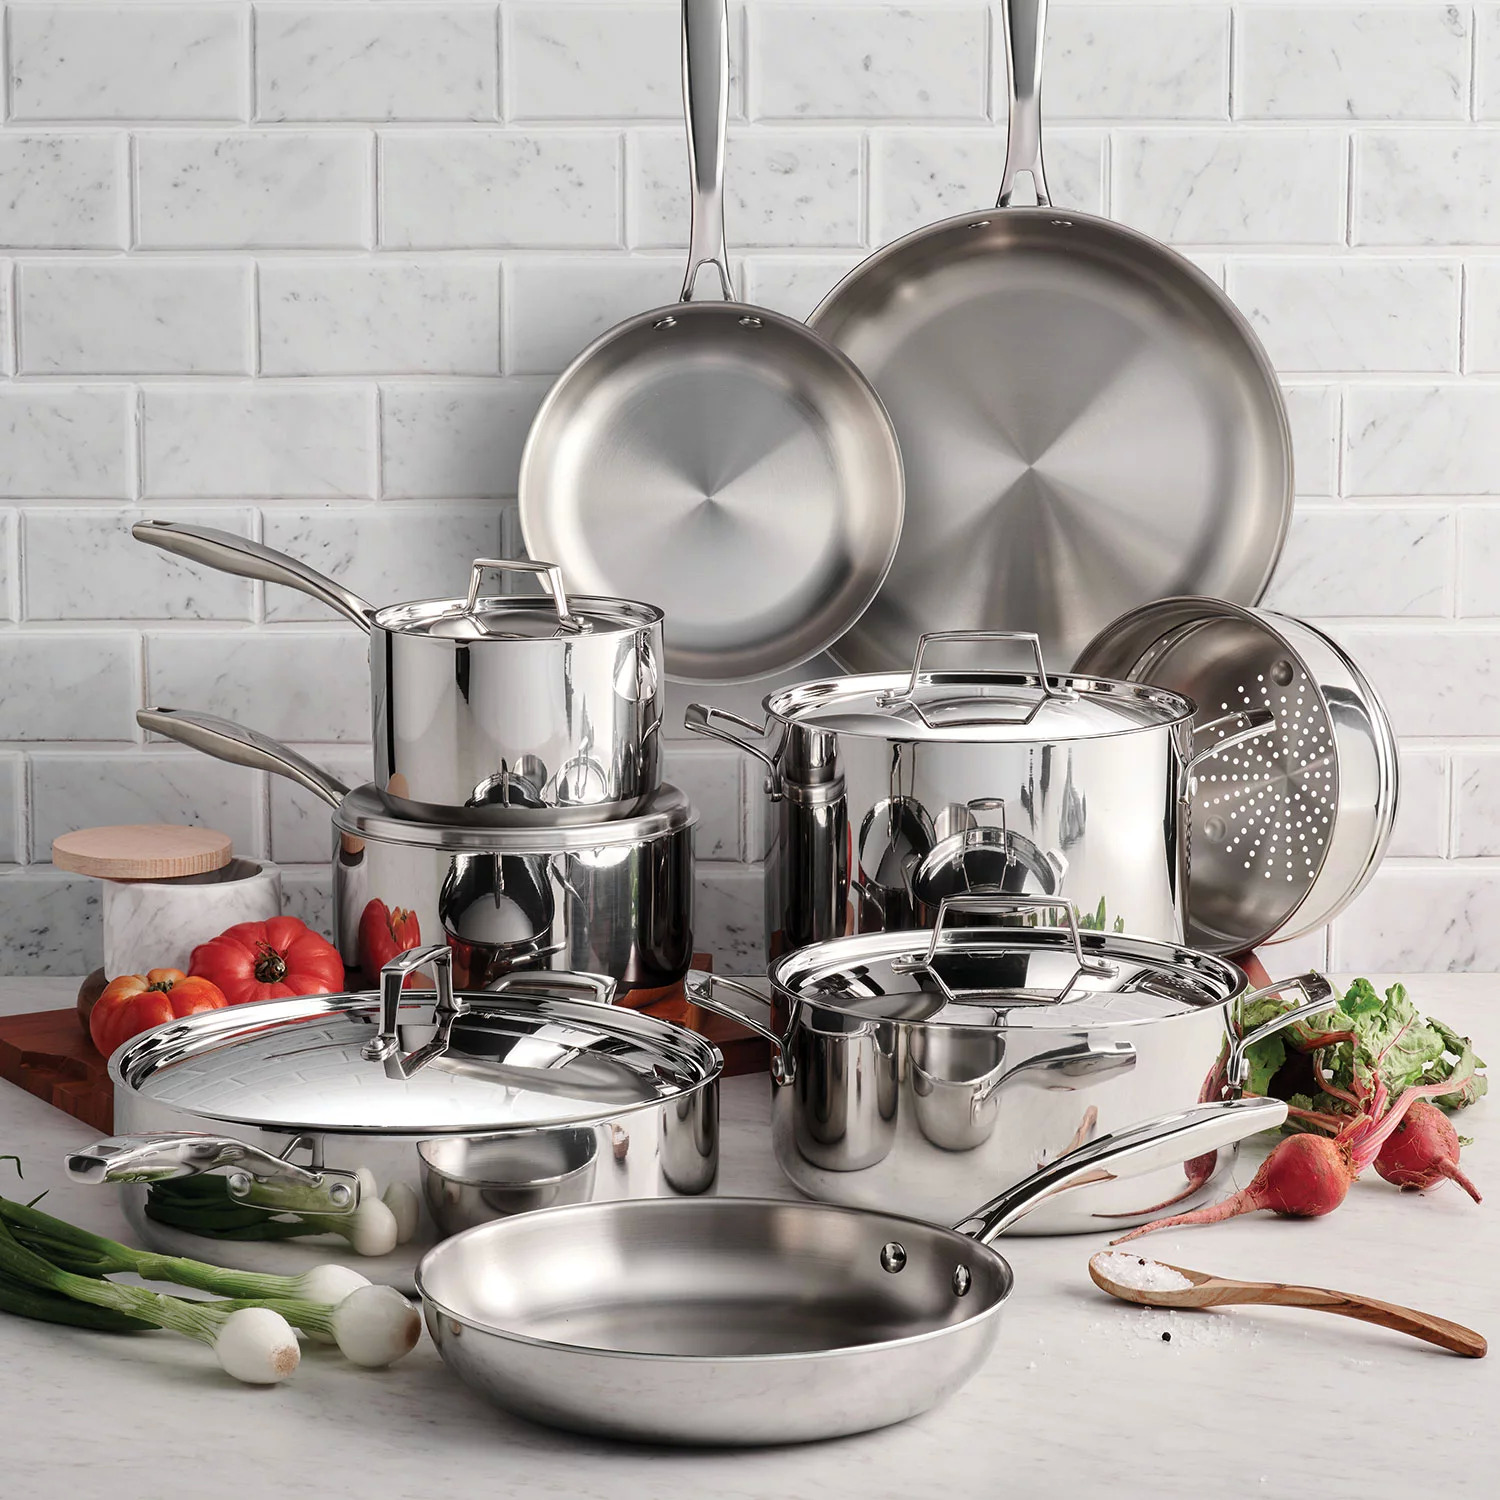 Sam's Club Members: 14-Piece Tramontina Tri-Ply Clad Cookware Set $199.98+ S/H (Varies by Location)